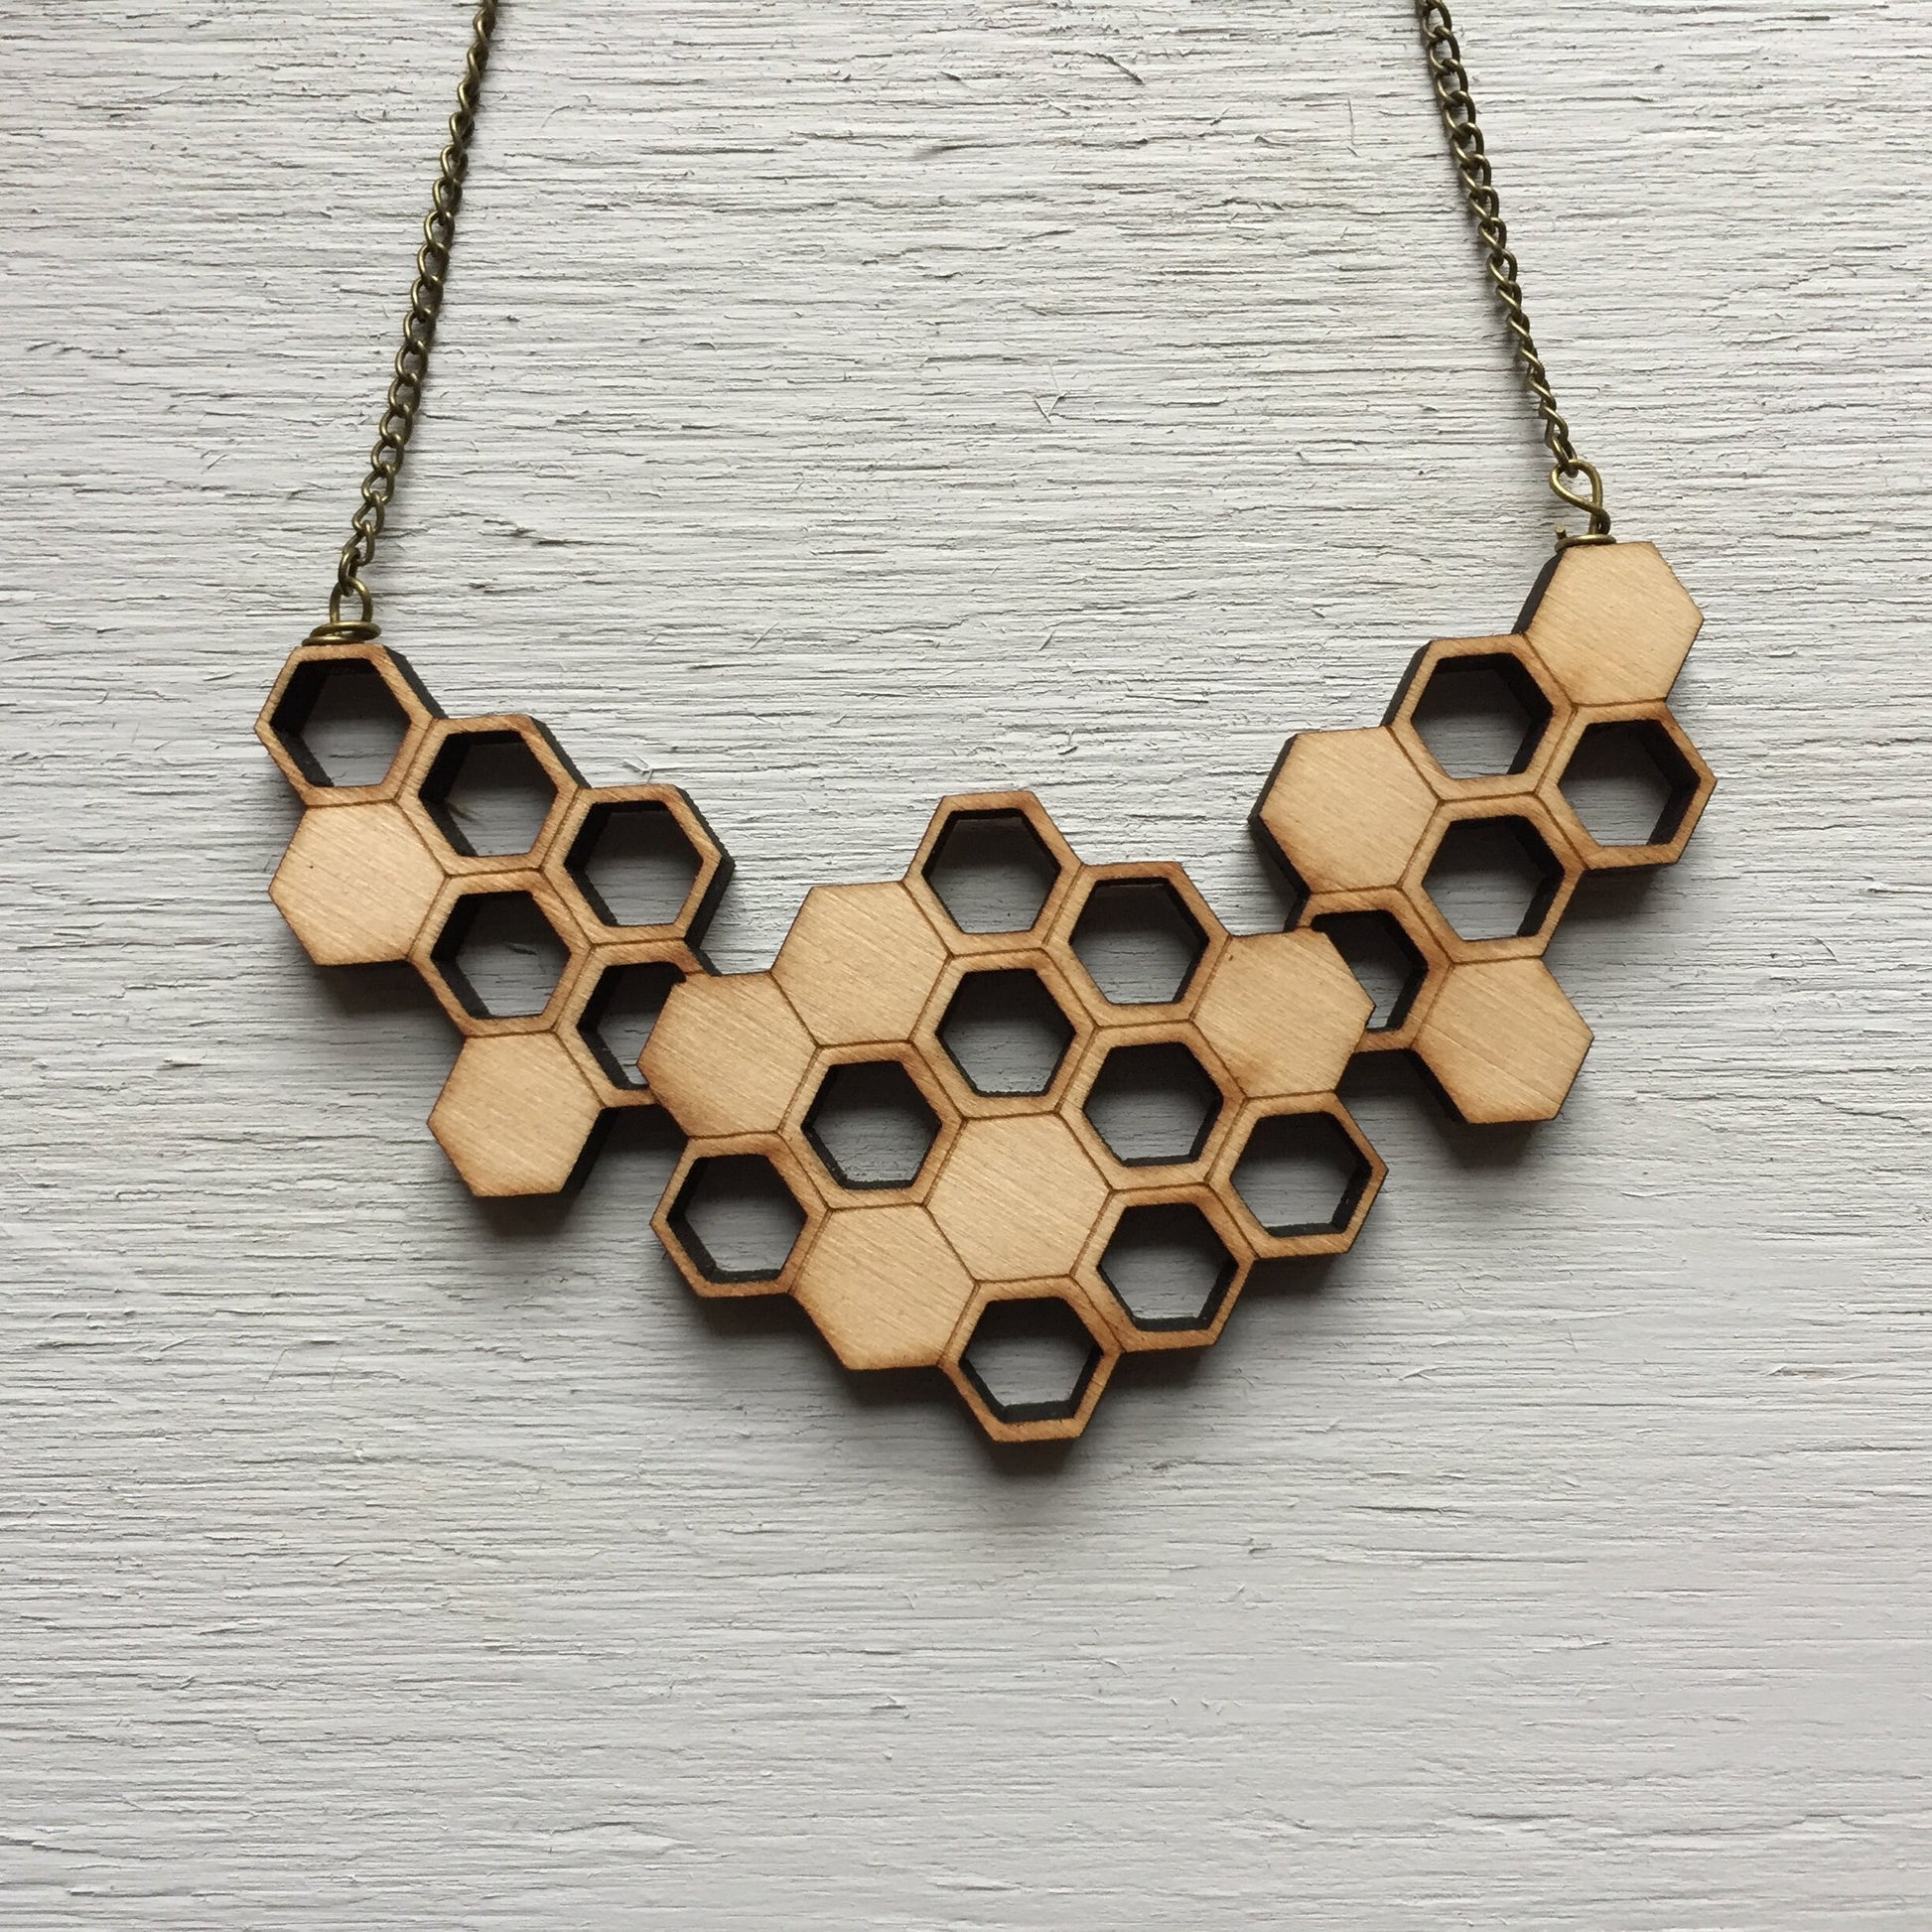 Honeycomb Statement Necklace- Wooden Laser Cut Necklace || Modern Geometric Jewelry